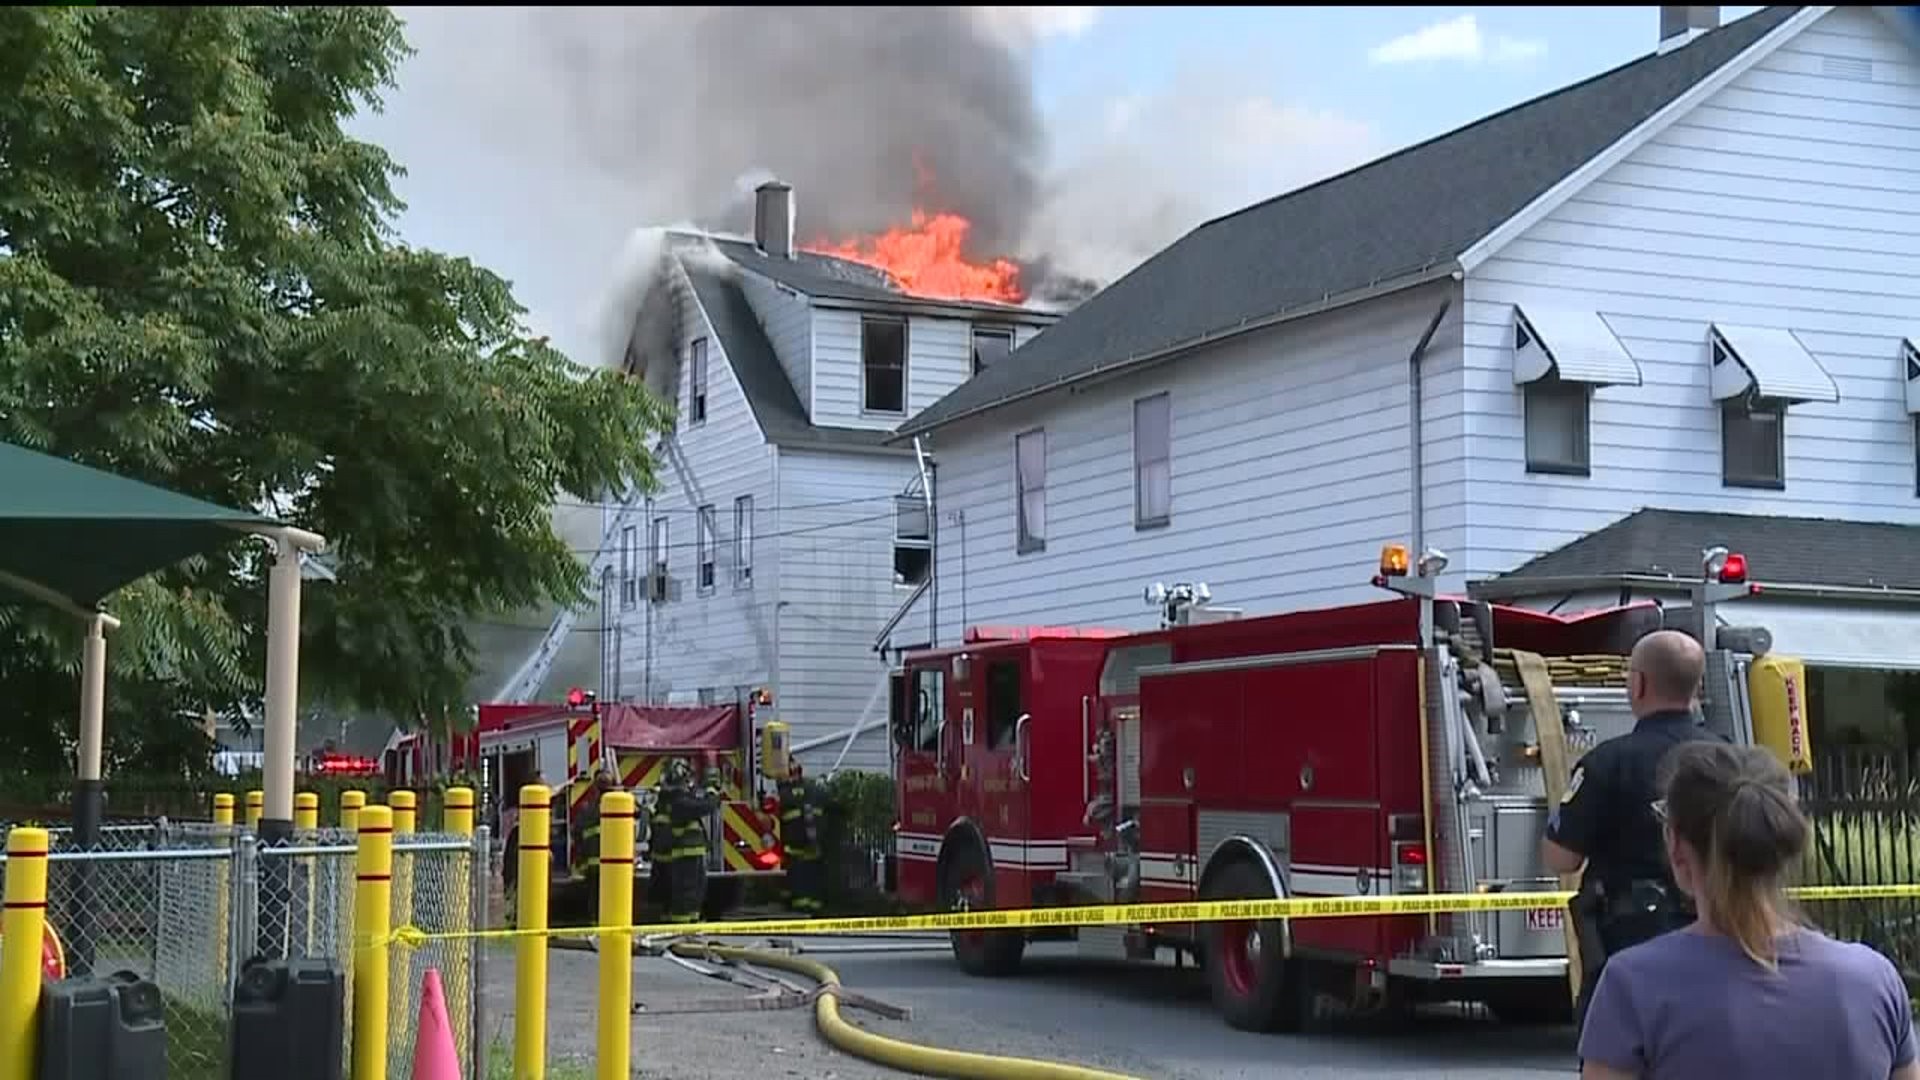 Six People Left Without a Home After a Fire in Scranton